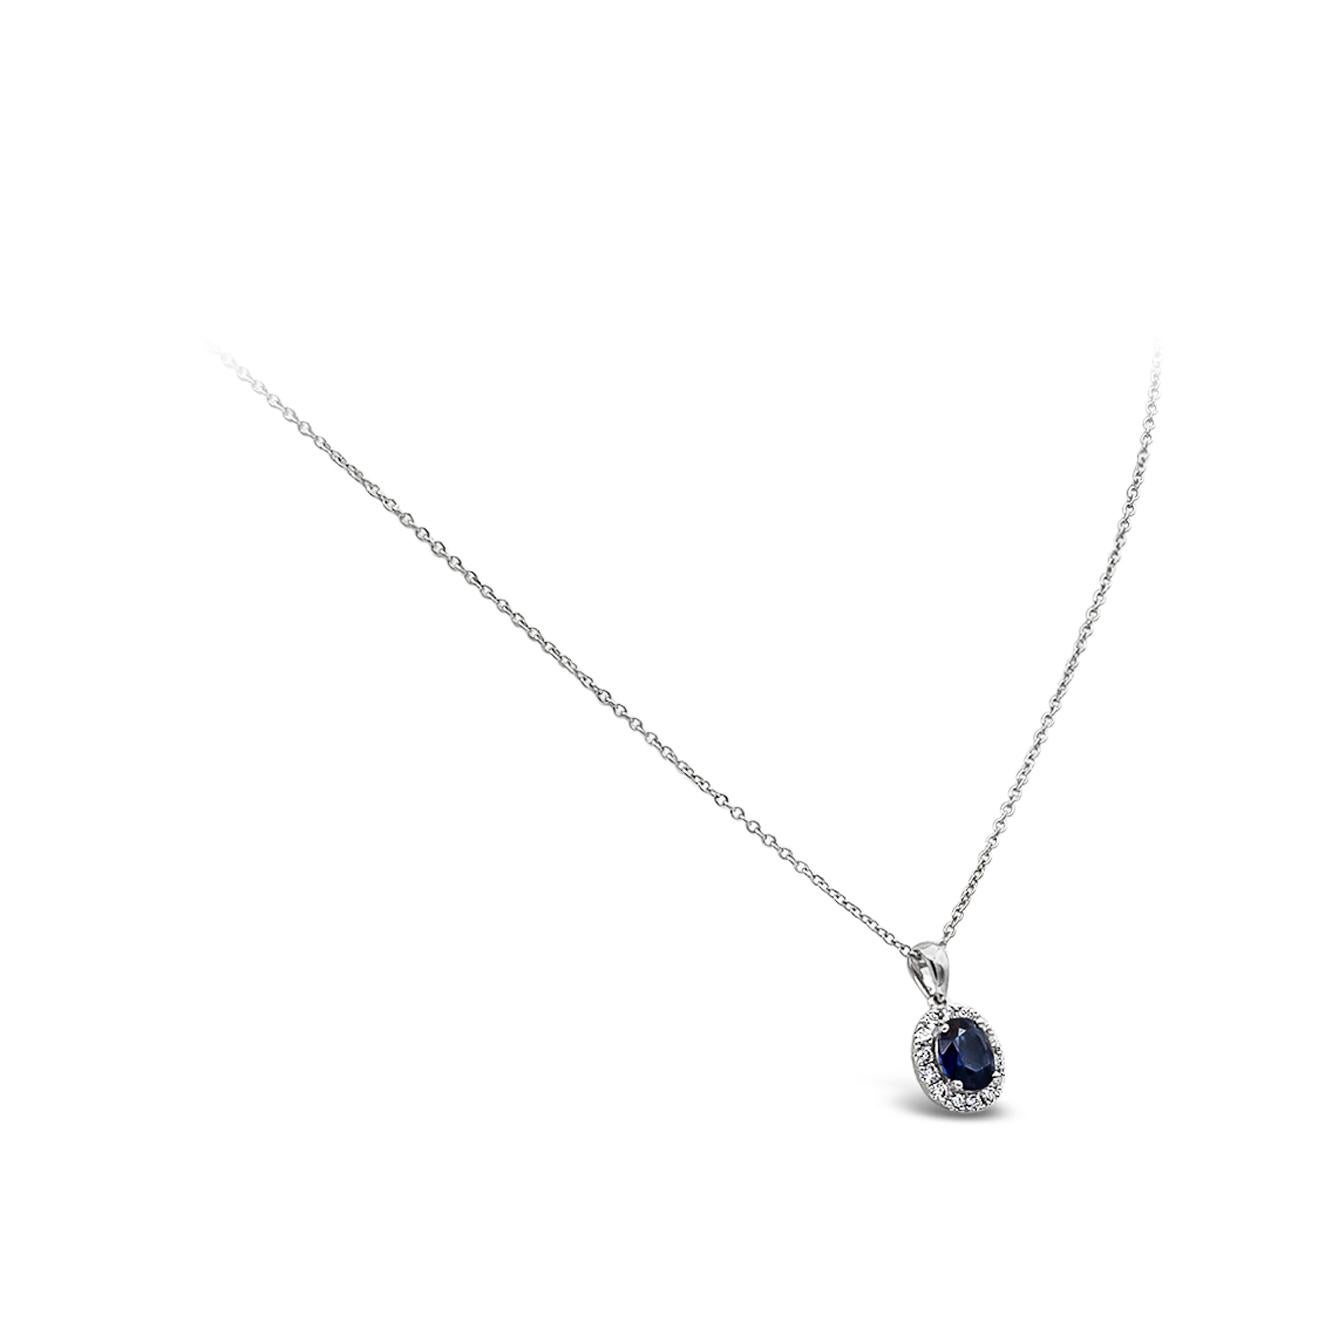 A classic pendant style showcasing a color-rich blue sapphire weighing 0.73 carats, surrounded by a row of halo round brilliant diamonds weighing 0.18 carats total. Made in 18K White Gold, 18 inch chain. Perfect for your everyday use.

Roman Malakov